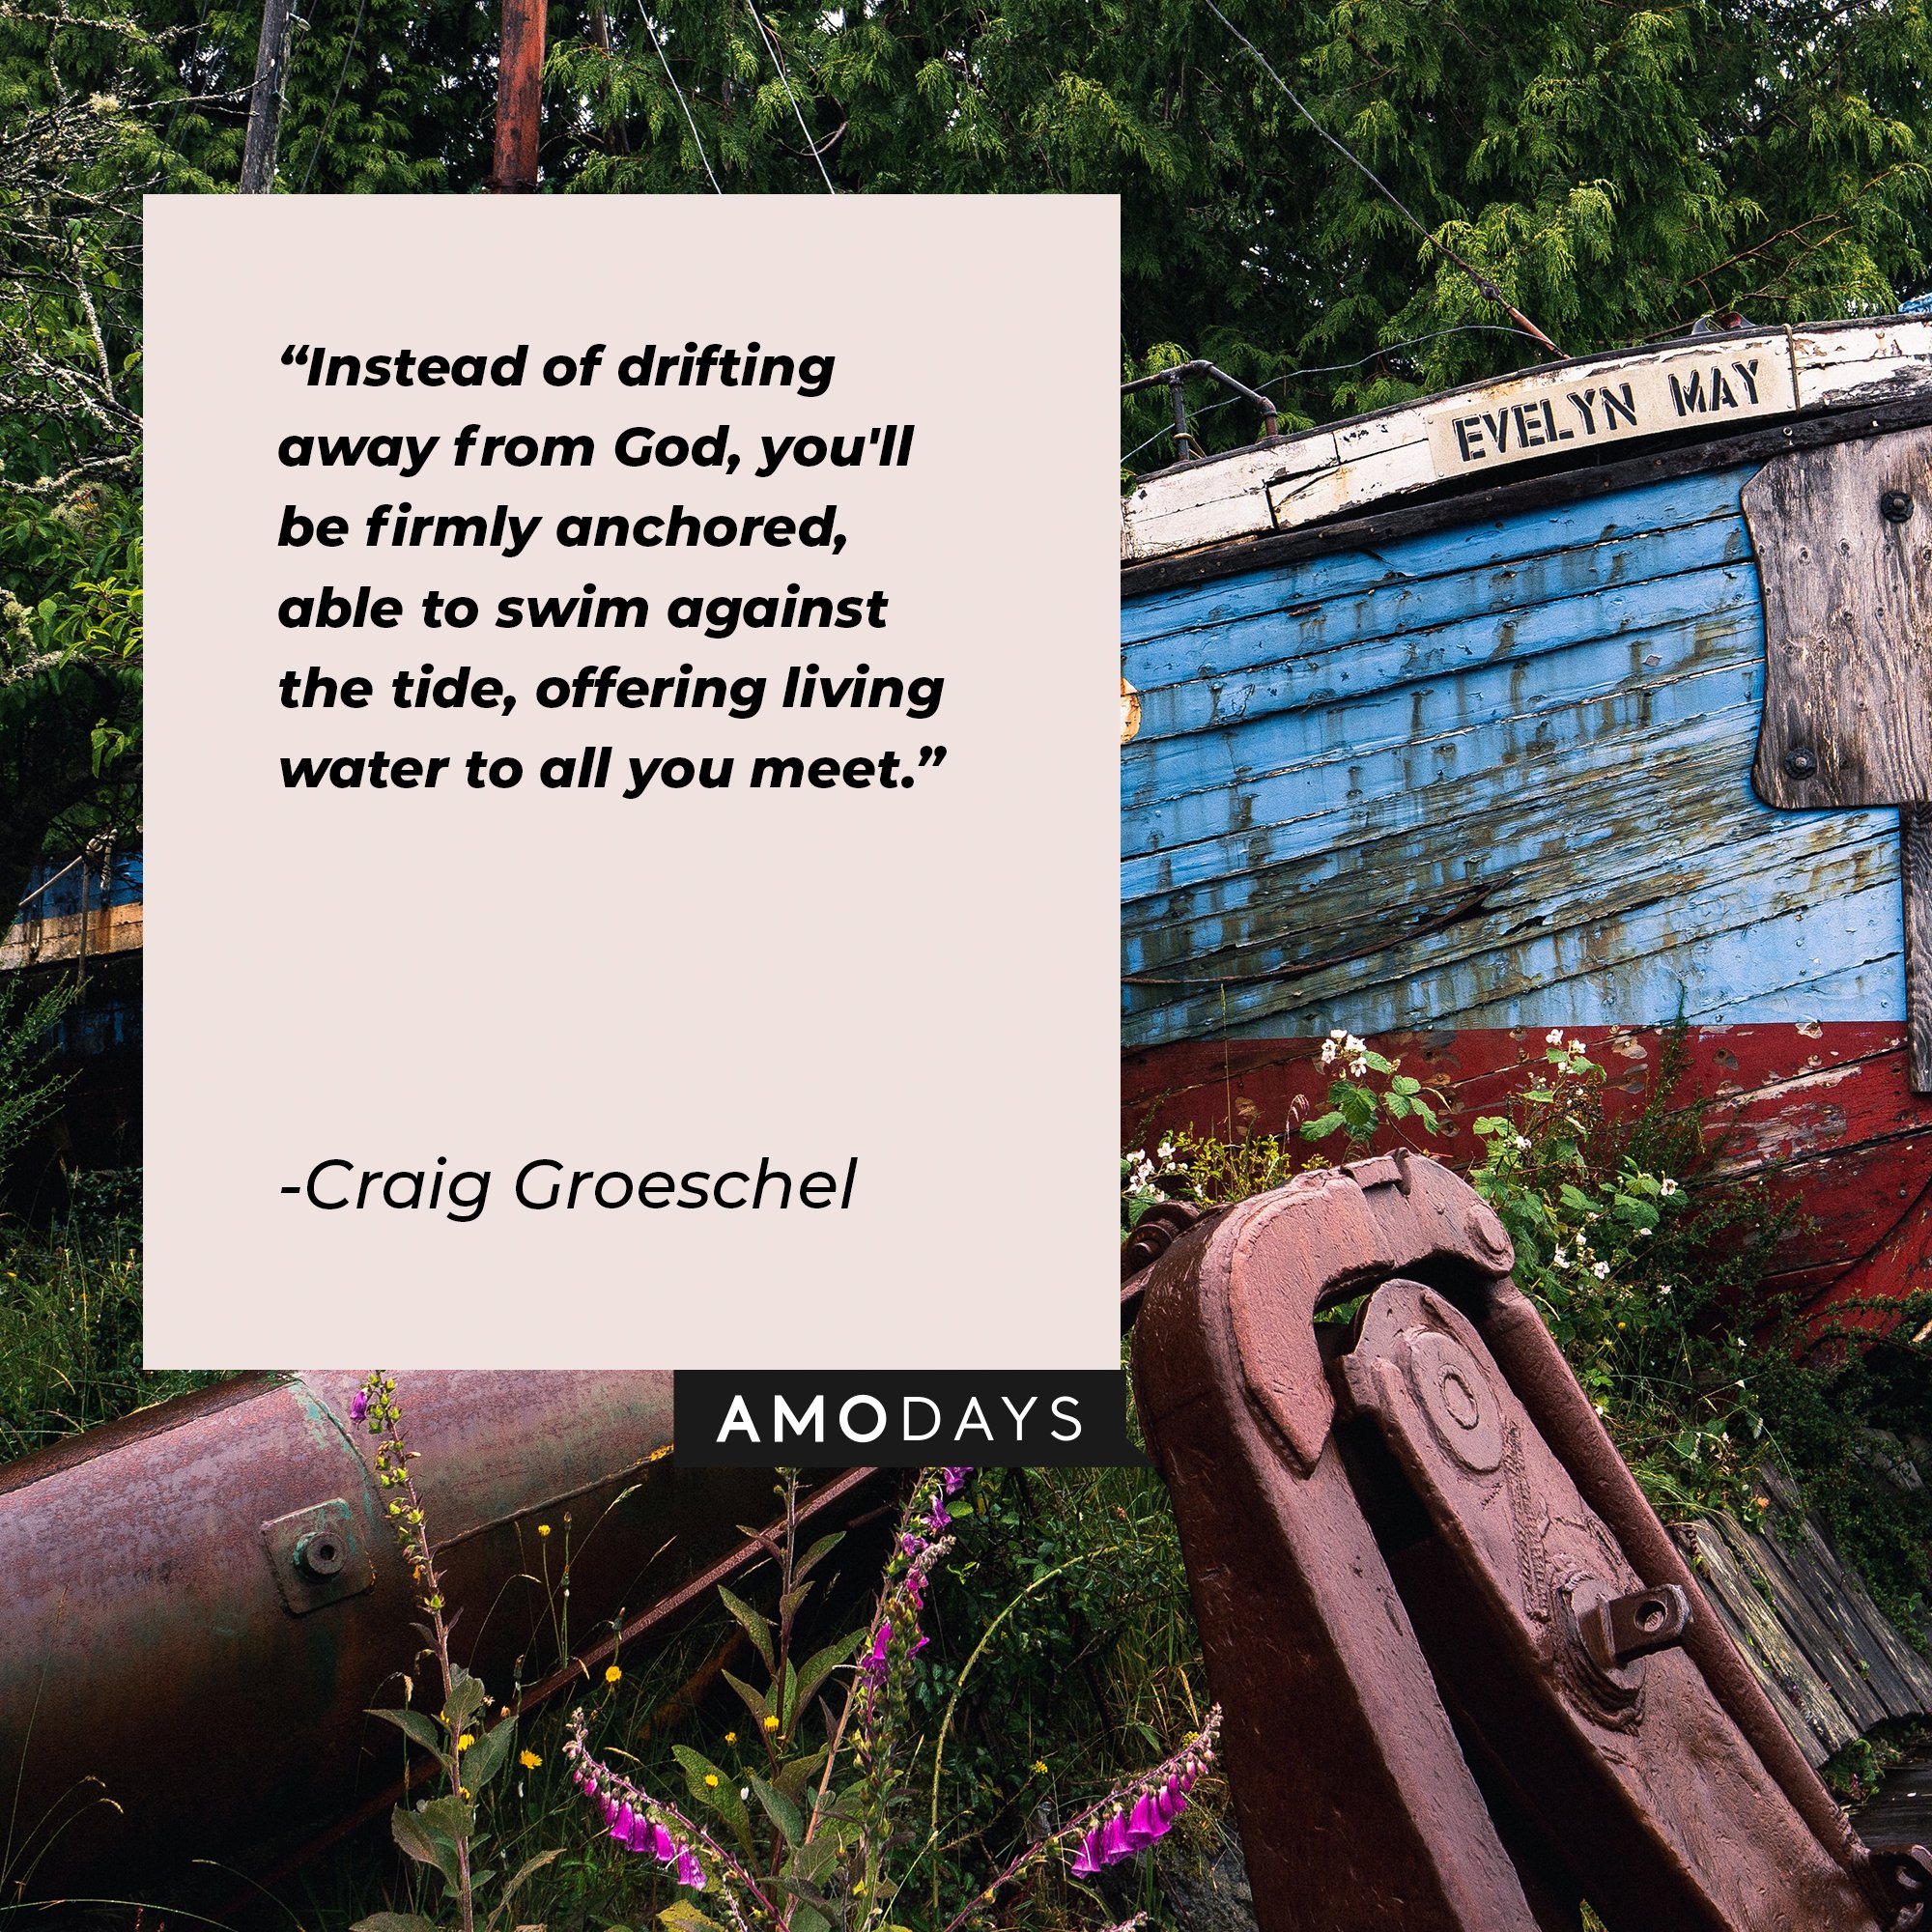 Craig Groeschel's quote: "Instead of drifting away from God, you'll be firmly anchored, able to swim against the tide, offering living water to all you meet." | Image: AmoDays